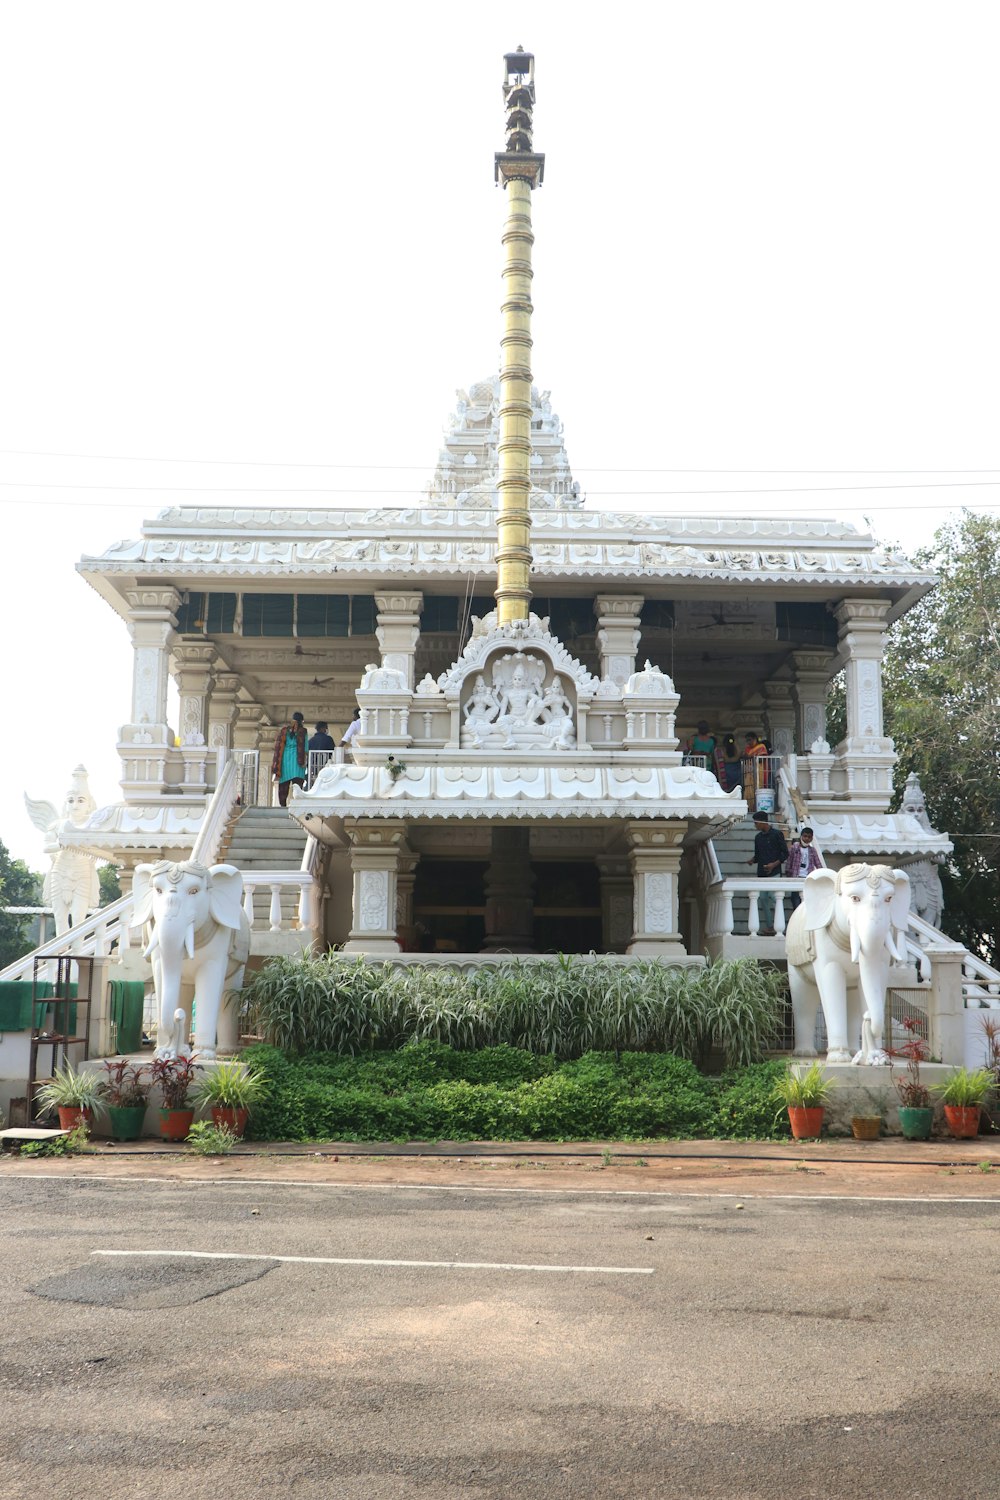 a large white building with statues of elephants